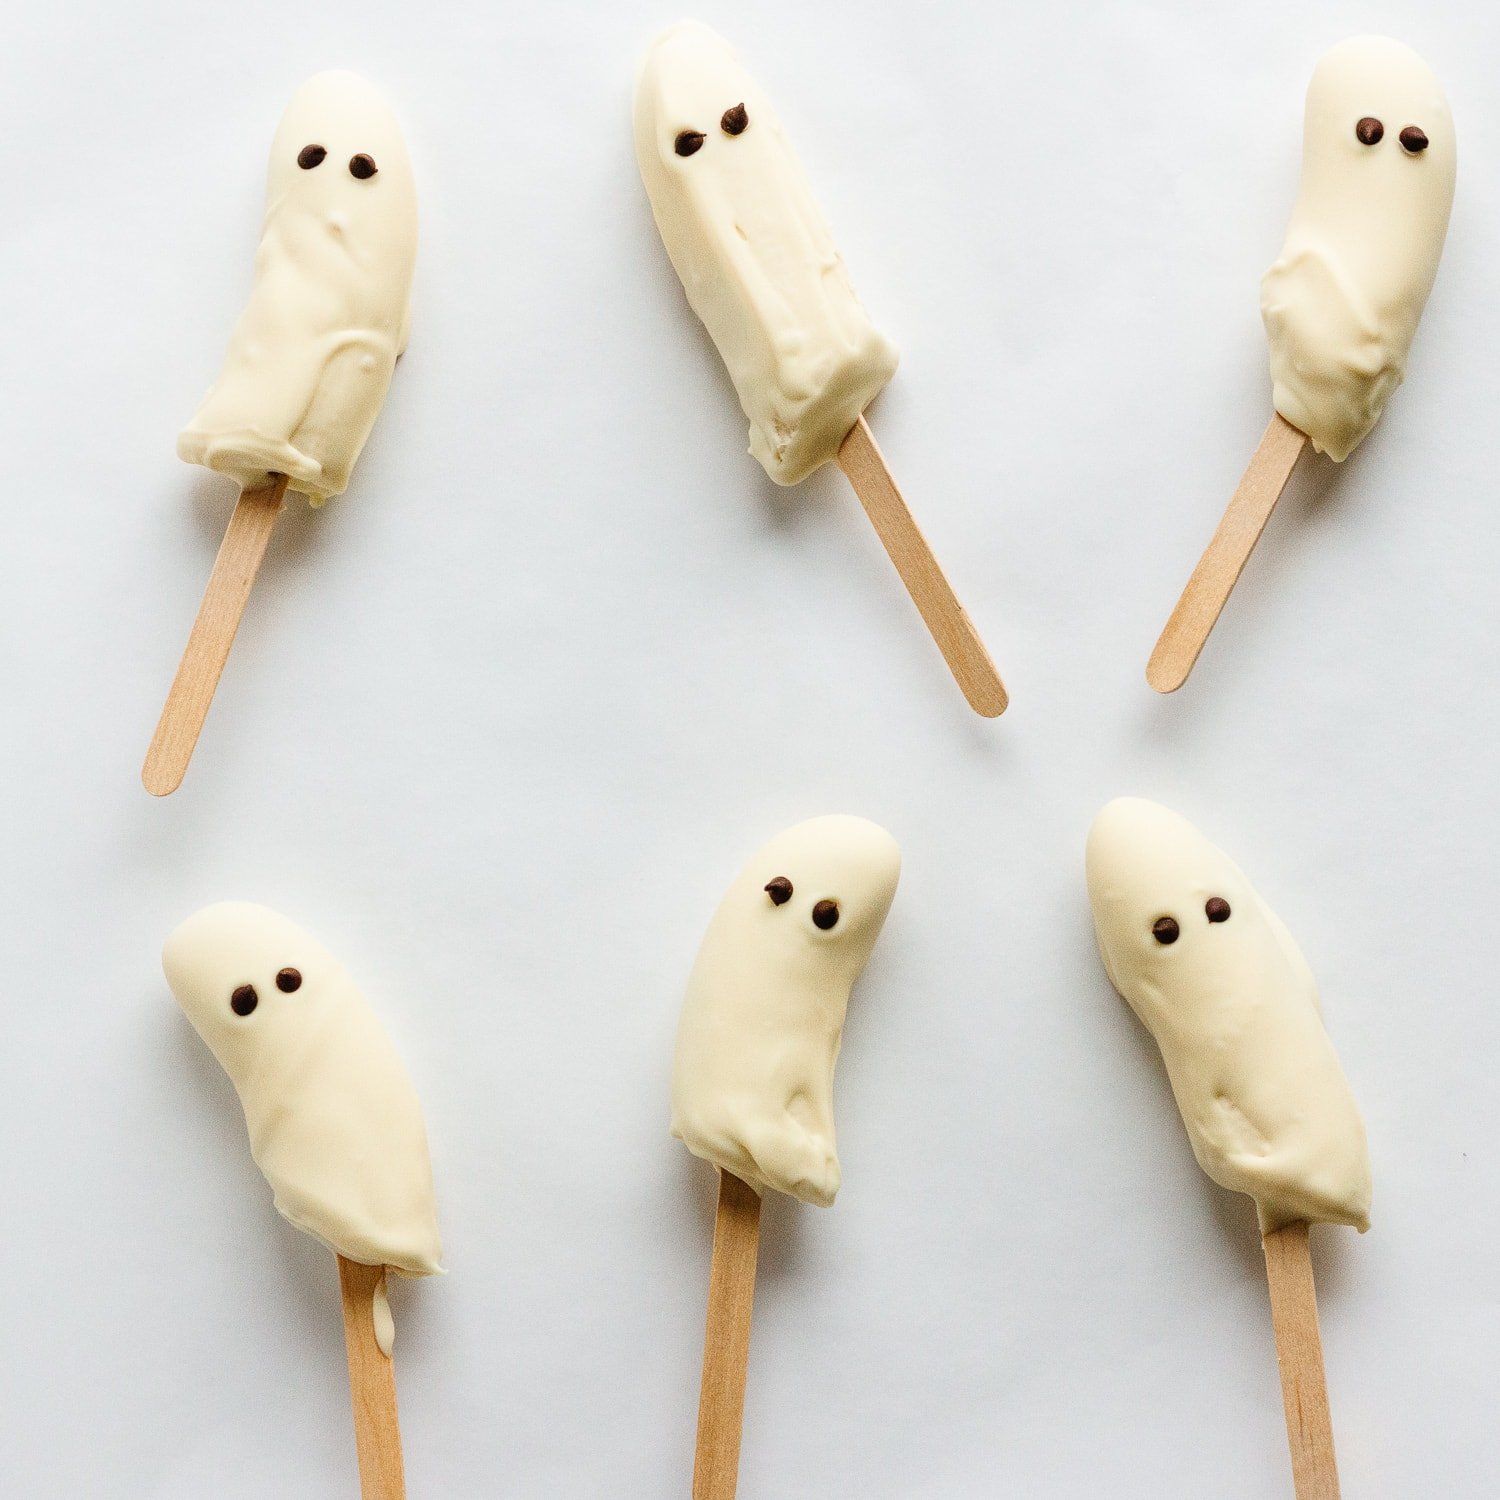 Bananas that are halved, placed on popsicle sticks and dipped in white chocolate with chocolate chip eyes to look like ghosts.